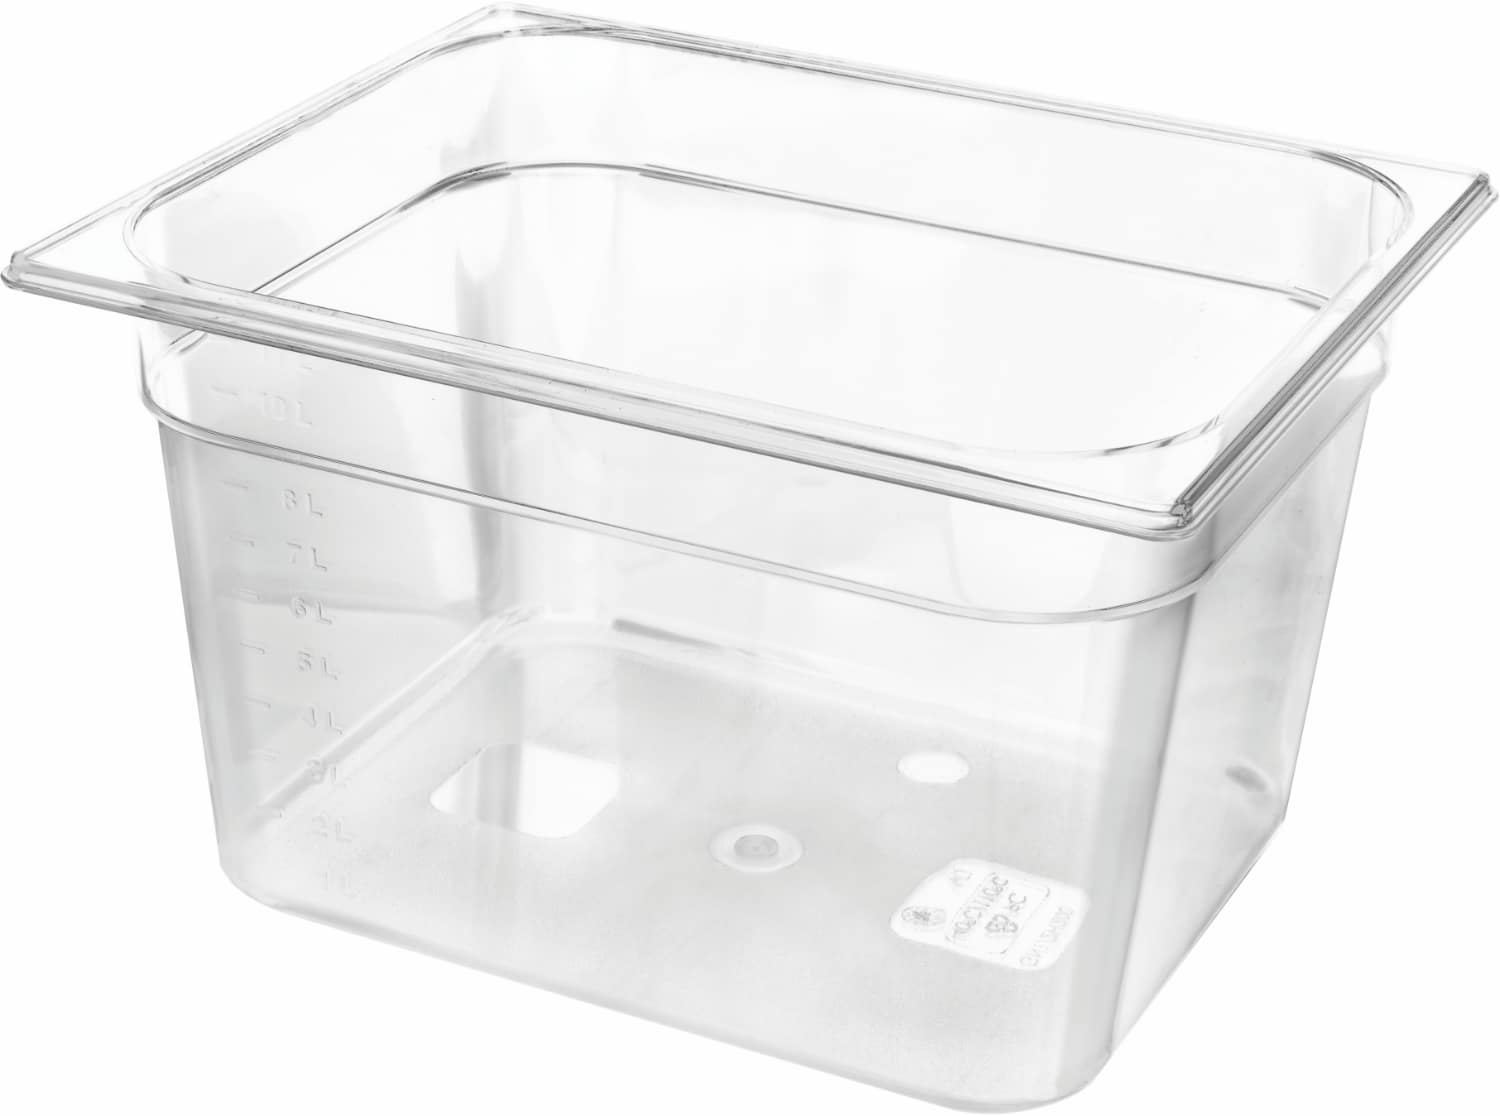 GN containers GN1/2 polycarbonate